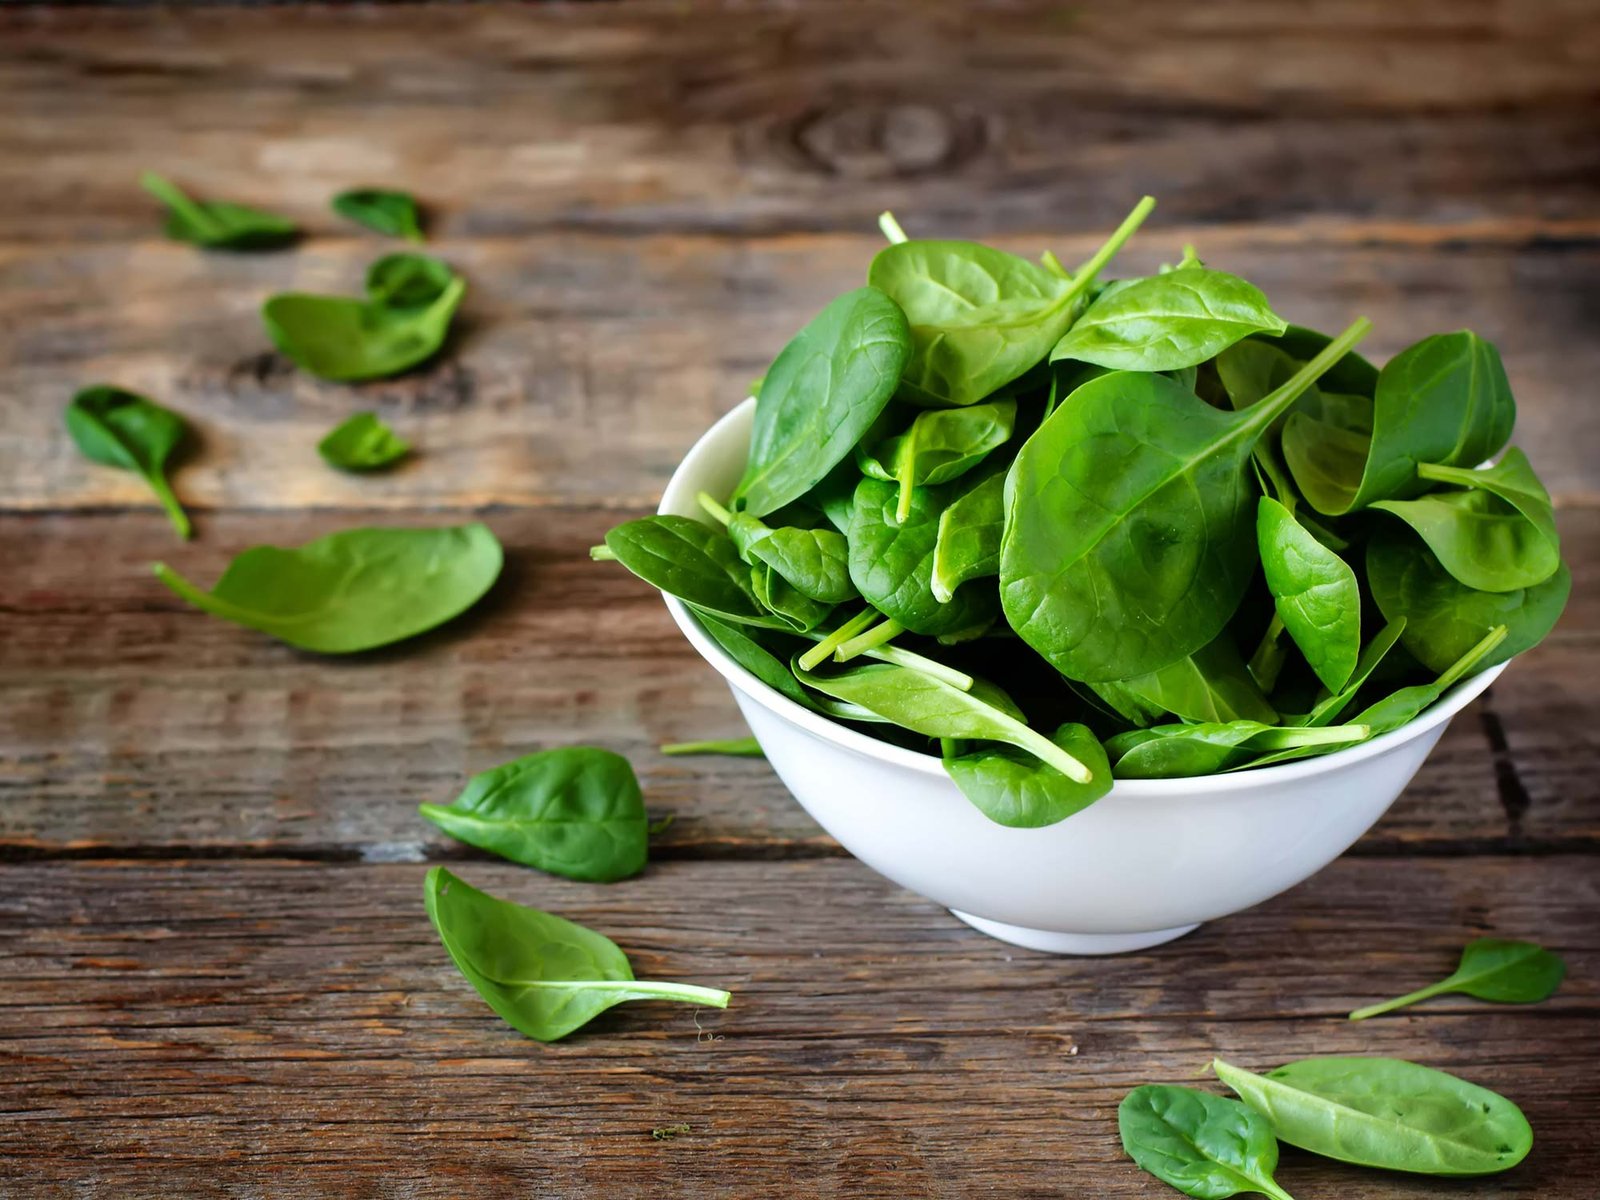 the-longer-the-spinach-is-boiled-the-less-lutein-the-spinach-retains-research